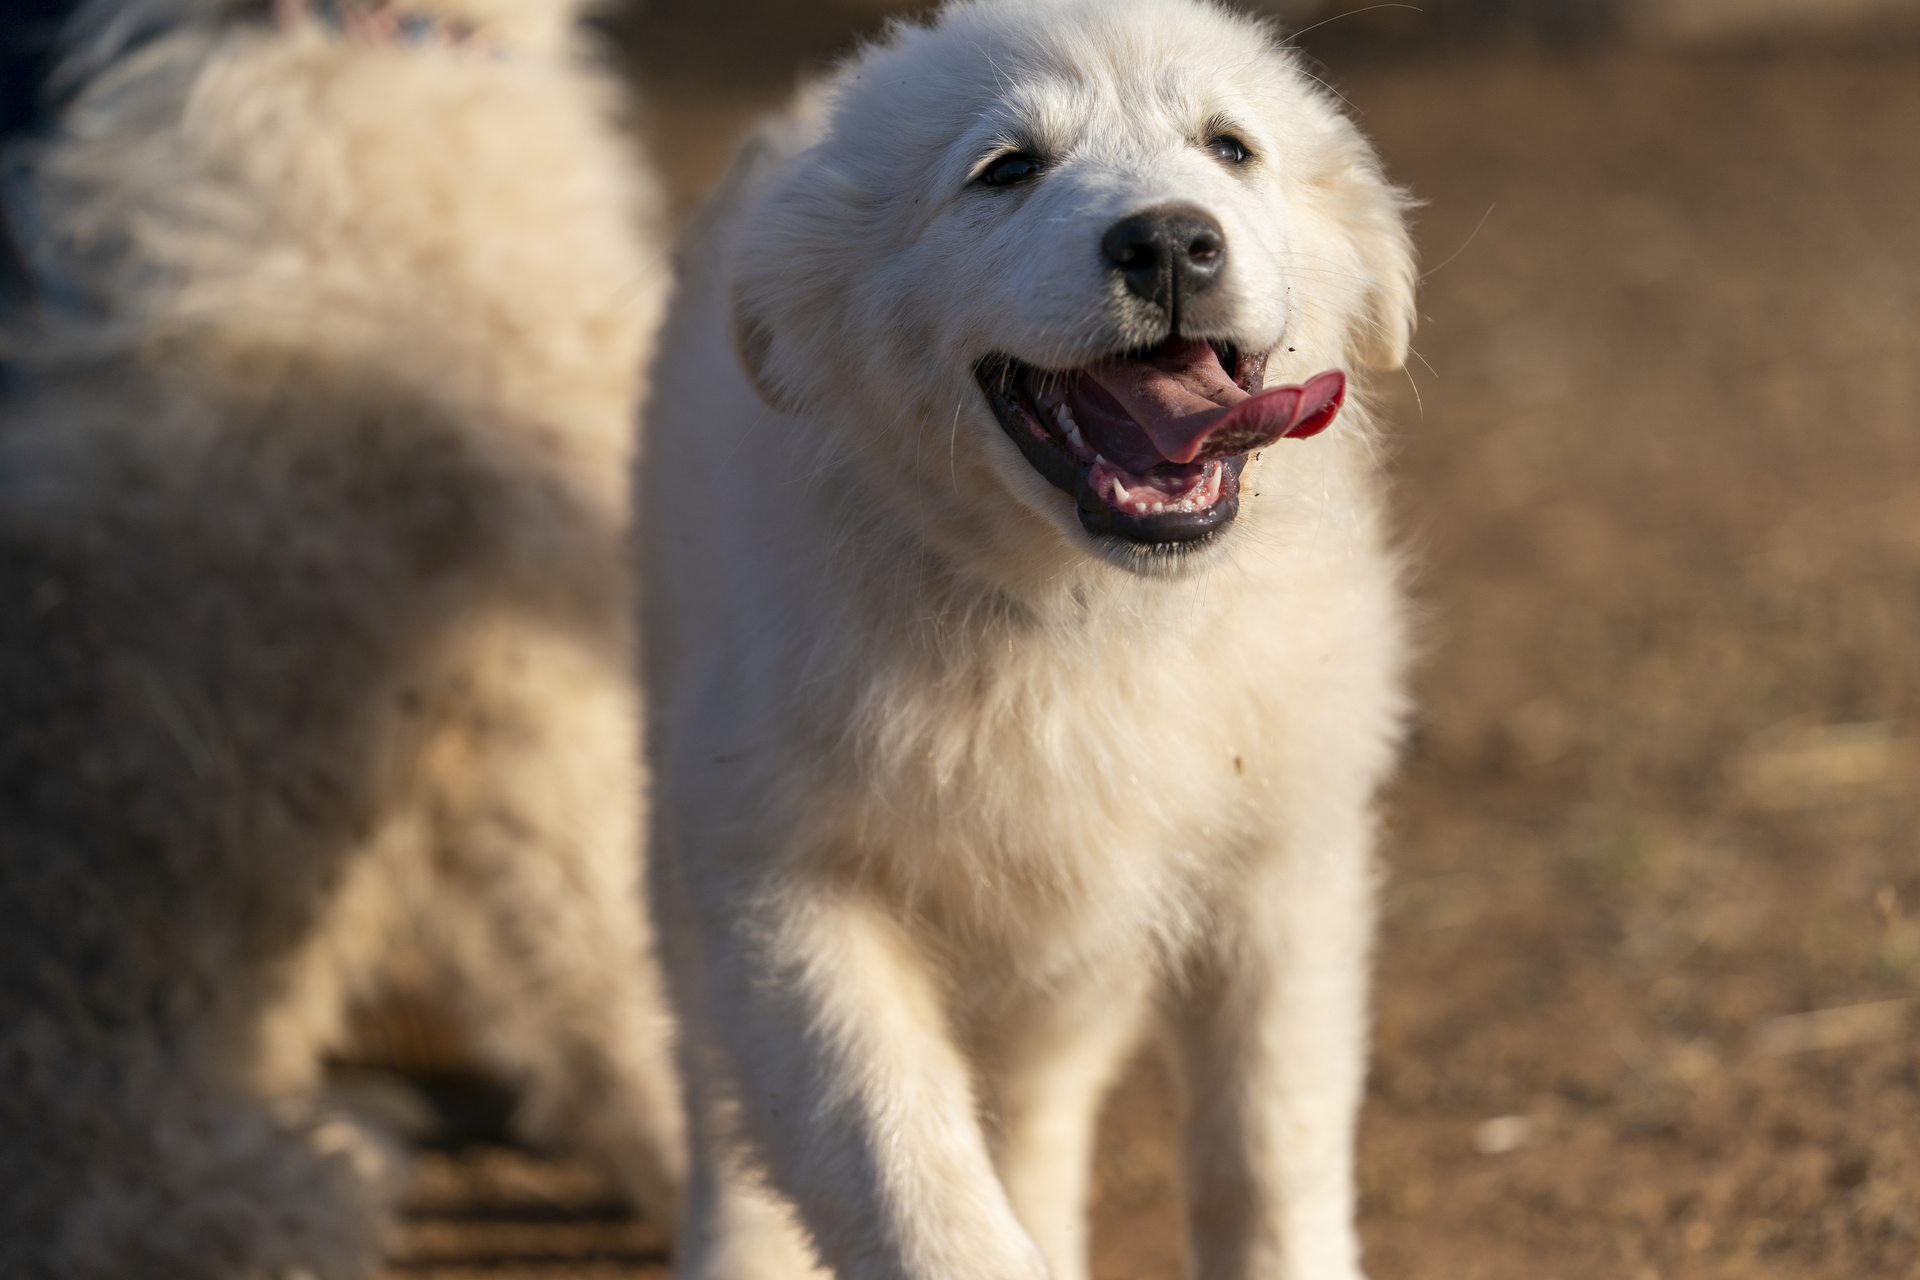 Livestock guardian dogs provide ranchers with a way to combat predators. (Texas A&M AgriLife photo by Michael Miller)